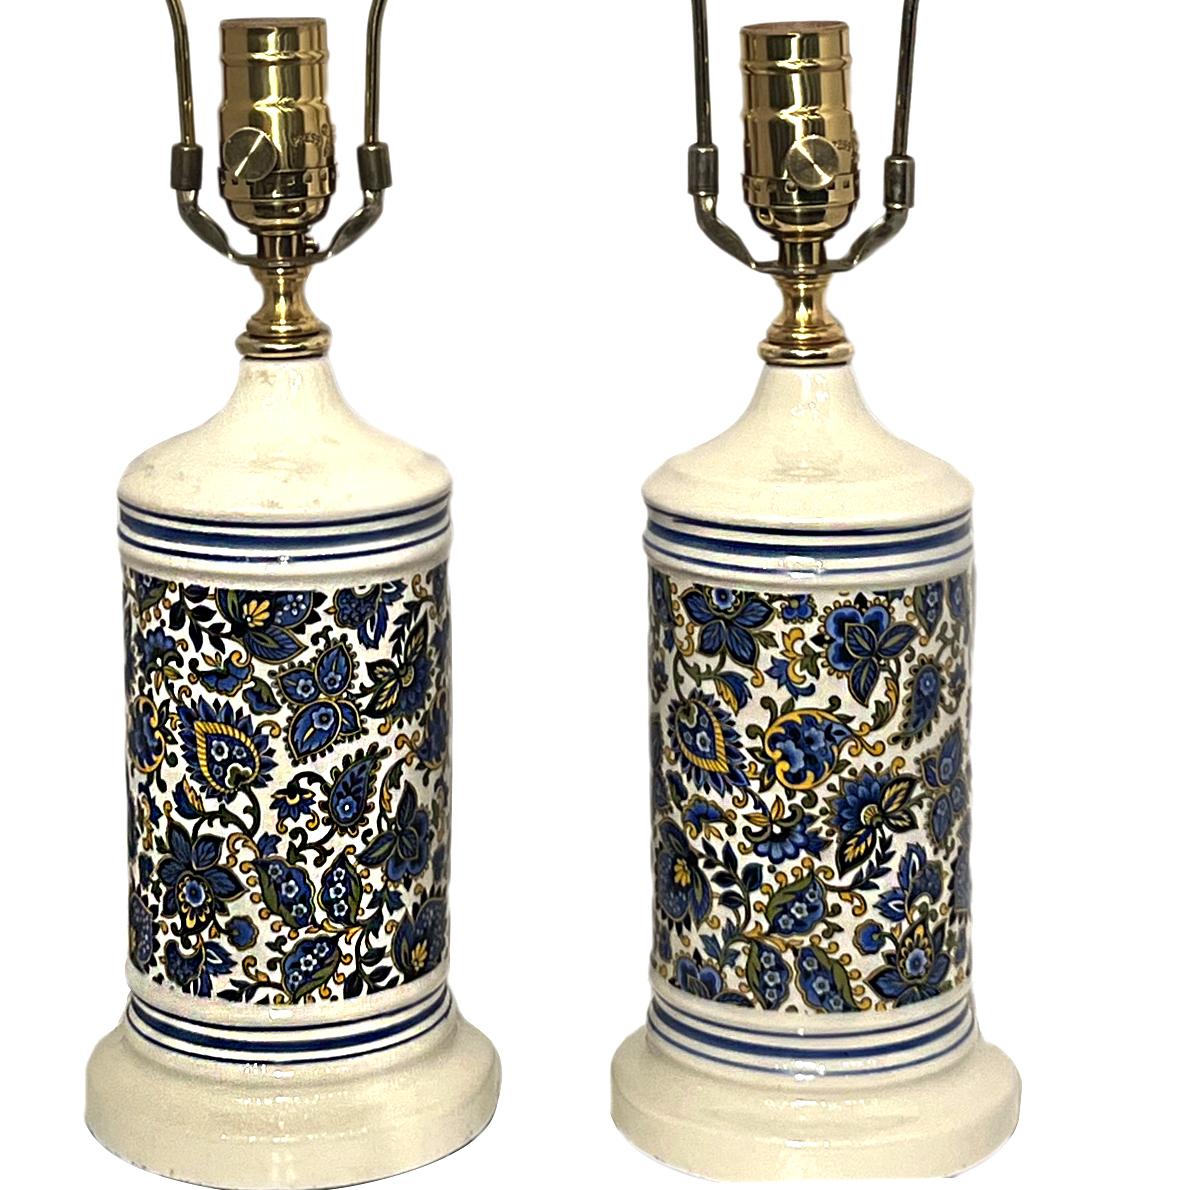 Pair of circa 1960s French porcelain table lamps.

Measurements:
Height of body: 9